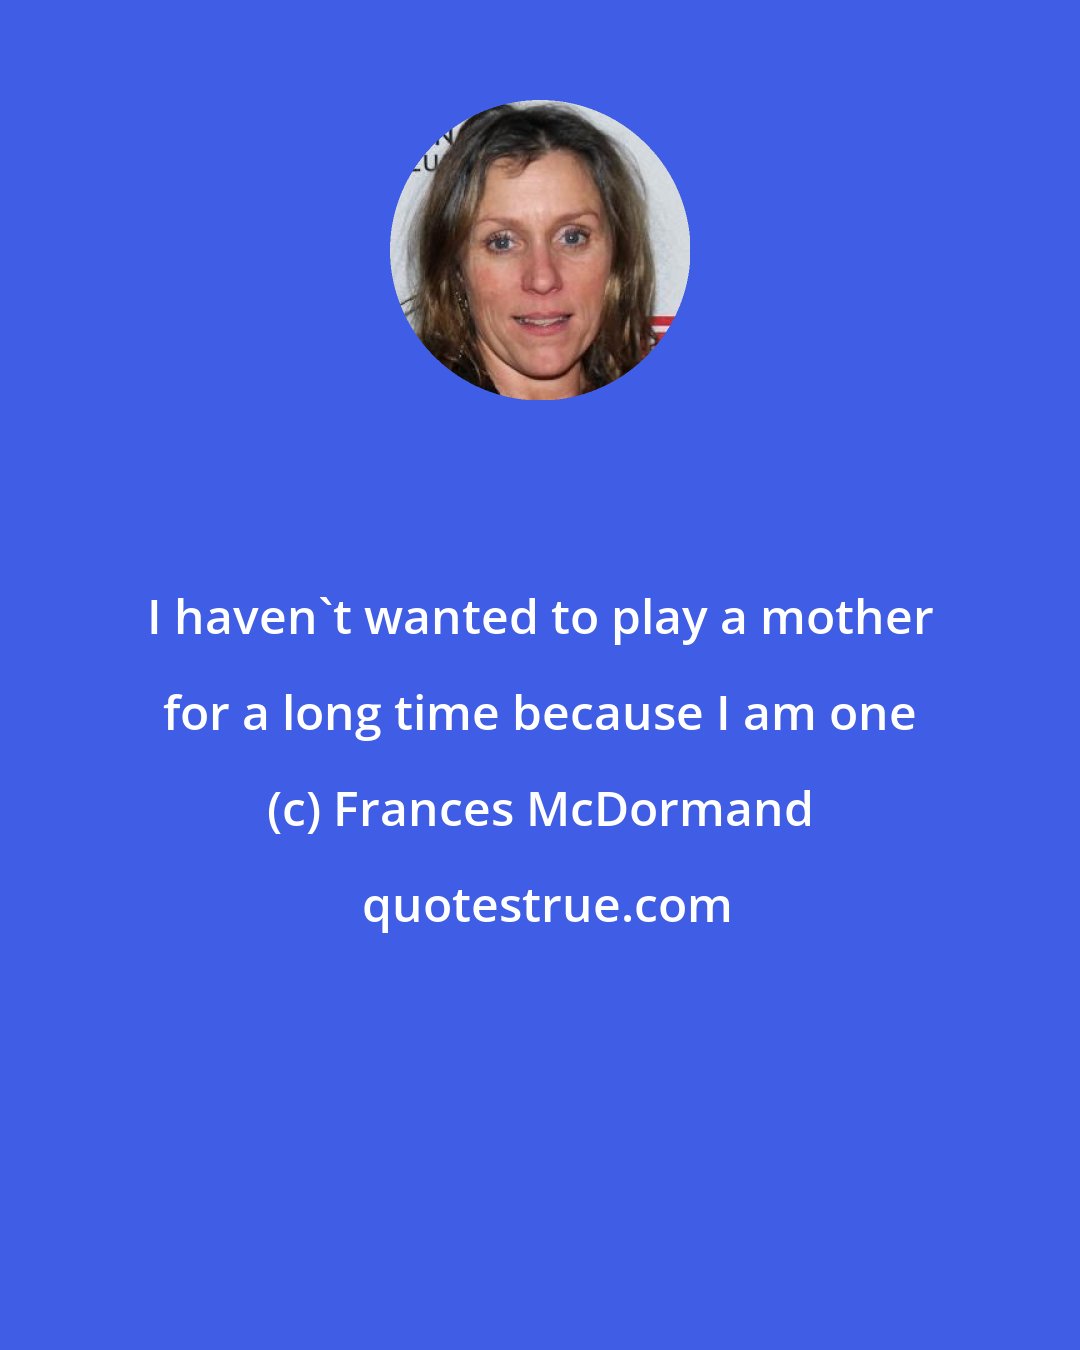 Frances McDormand: I haven't wanted to play a mother for a long time because I am one